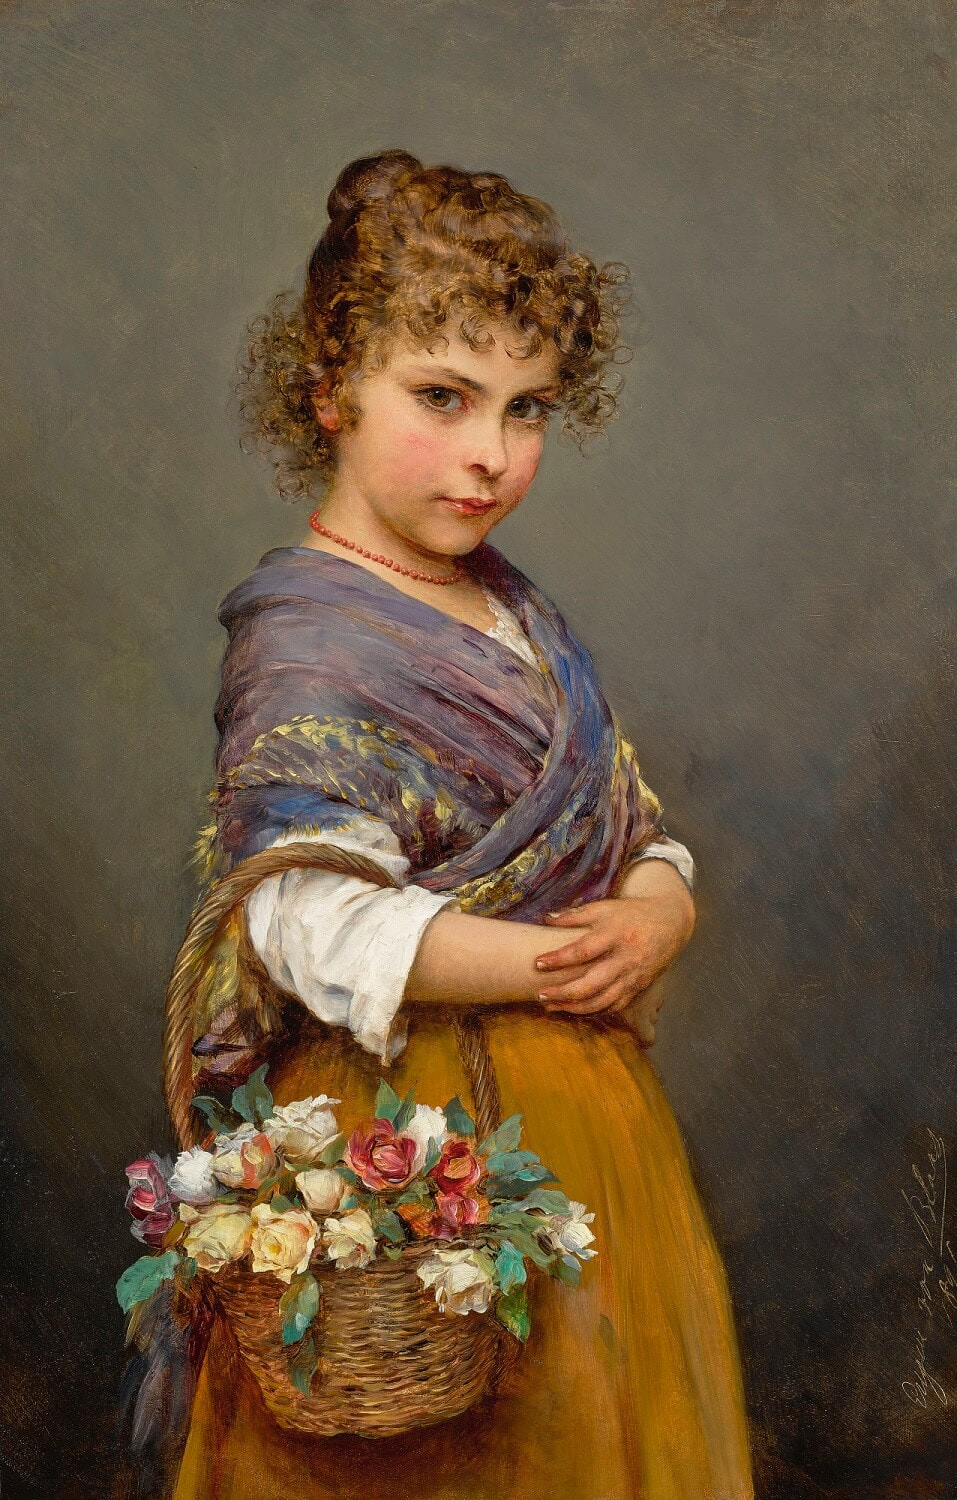 Young Girl with a Basket of Flowers (1894) by Eugene de Blaas